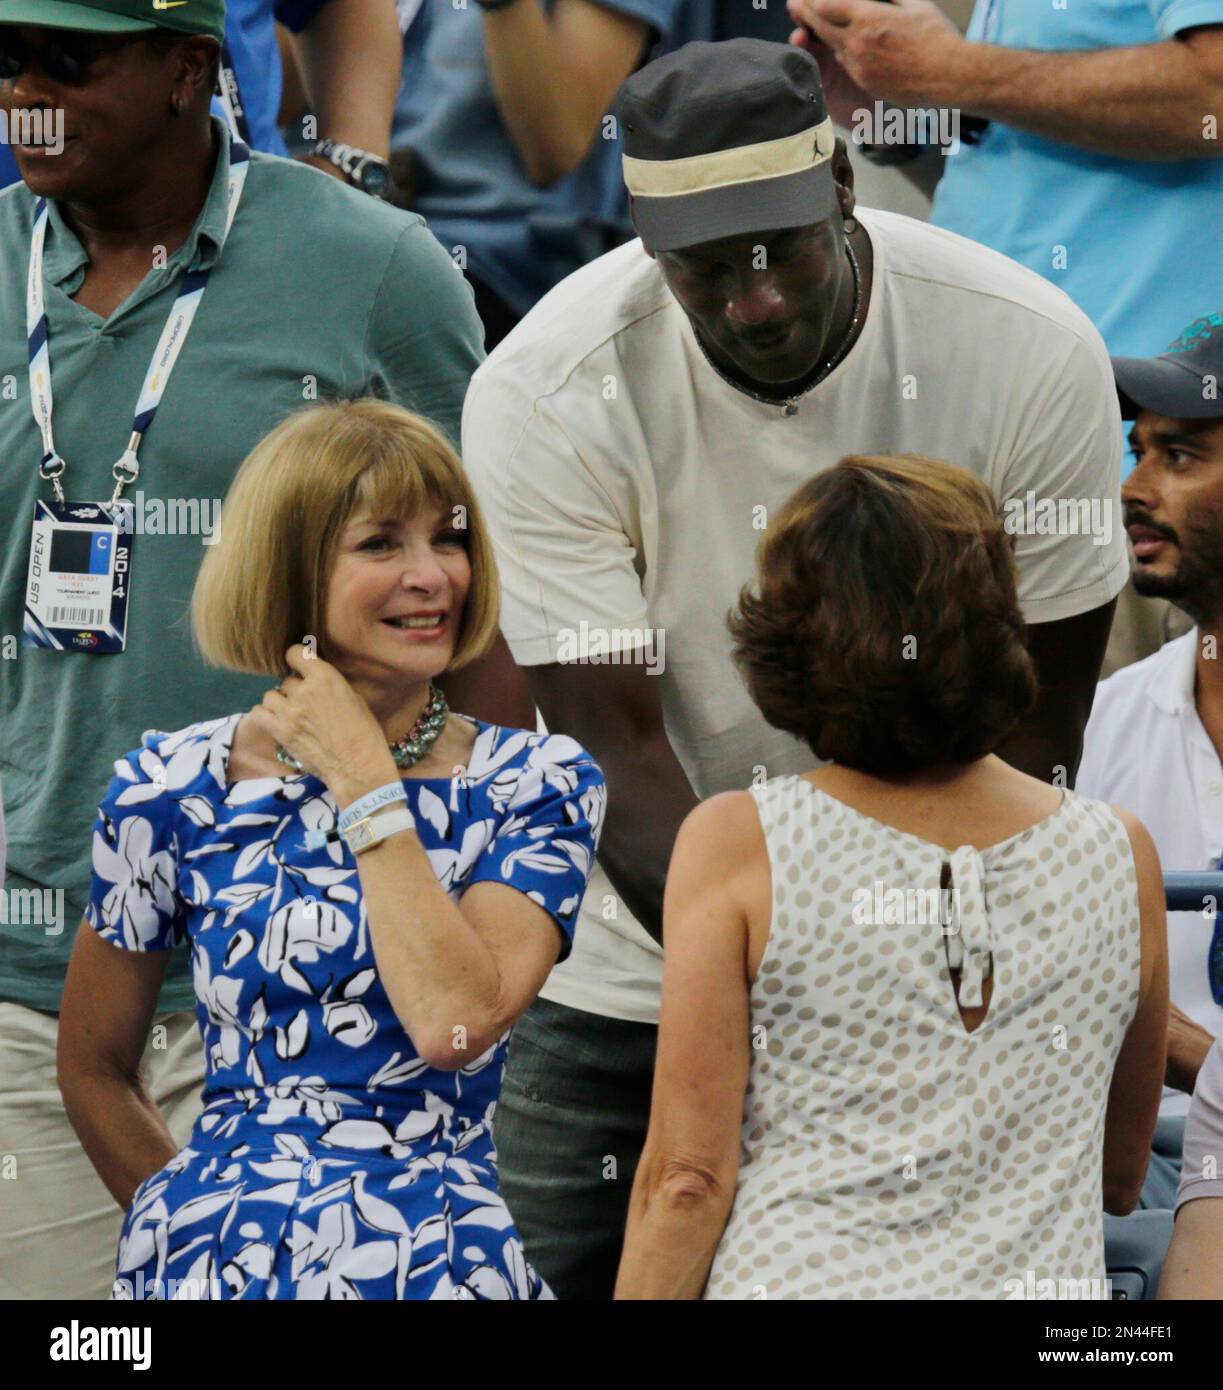 Anna Wintour, left, editor-in-chief of American Vogue, and former  basketball player Michael Jordan, talk with other spectators before  watching play between Roger Federer, of Switzerland, and Marin Cilic, of  Croatia, during the